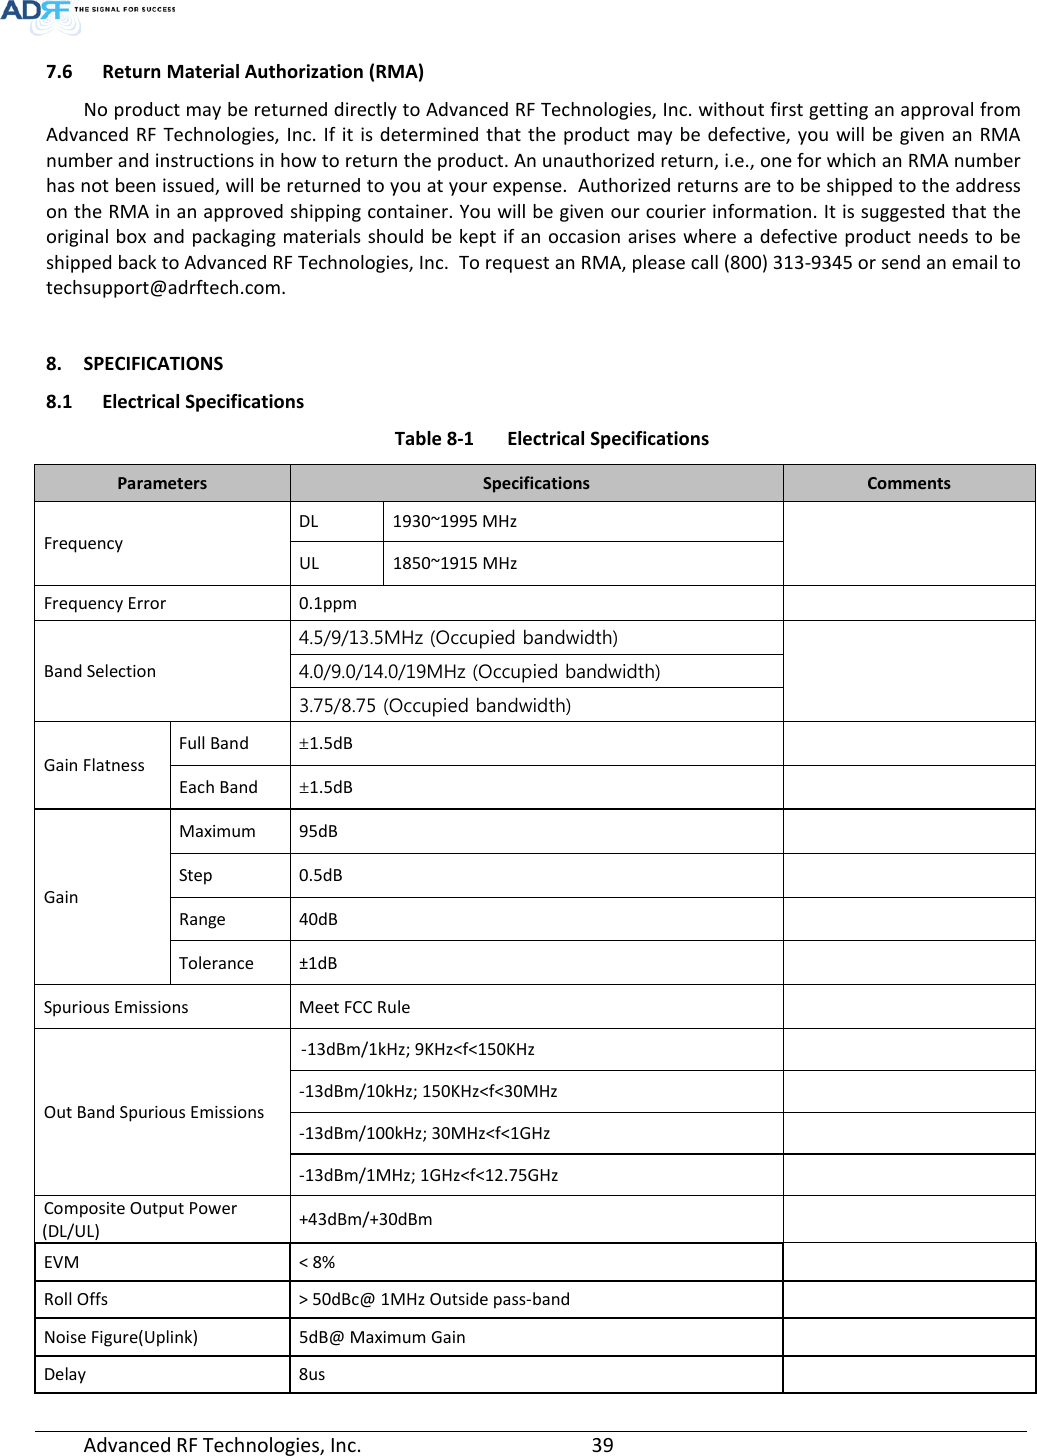 7.6 Return Material Authorization (RMA) No product may be returned directly to Advanced RF Technologies, Inc. without first getting an approval from Advanced RF Technologies, Inc. If it is determined that the product may be defective, you will be given an RMA number and instructions in how to return the product. An unauthorized return, i.e., one for which an RMA number has not been issued, will be returned to you at your expense.  Authorized returns are to be shipped to the address on the RMA in an approved shipping container. You will be given our courier information. It is suggested that the original box and packaging materials should be kept if an occasion arises where a defective product needs to be shipped back to Advanced RF Technologies, Inc.  To request an RMA, please call (800) 313-9345 or send an email to techsupport@adrftech.com. 8. SPECIFICATIONS8.1 Electrical Specifications Table 8-1  Electrical Specifications Parameters  Specifications  Comments Frequency DL  1930~1995 MHz UL  1850~1915 MHz Frequency Error 0.1ppm Band Selection 4.5/9/13.5MHz (Occupied bandwidth) 4.0/9.0/14.0/19MHz (Occupied bandwidth) 3.75/8.75 (Occupied bandwidth) Gain Flatness Full Band ±1.5dB Each Band ±1.5dB Gain Maximum  95dB Step  0.5dB Range  40dB Tolerance ±1dB Spurious Emissions Meet FCC Rule Out Band Spurious Emissions -13dBm/1kHz; 9KHz&lt;f&lt;150KHz -13dBm/10kHz; 150KHz&lt;f&lt;30MHz -13dBm/100kHz; 30MHz&lt;f&lt;1GHz -13dBm/1MHz; 1GHz&lt;f&lt;12.75GHz Composite Output Power (DL/UL) +43dBm/+30dBm EVM &lt; 8% Roll Offs &gt; 50dBc@ 1MHz Outside pass-band Noise Figure(Uplink)  5dB@ Maximum Gain Delay 8us Advanced RF Technologies, Inc. 39 